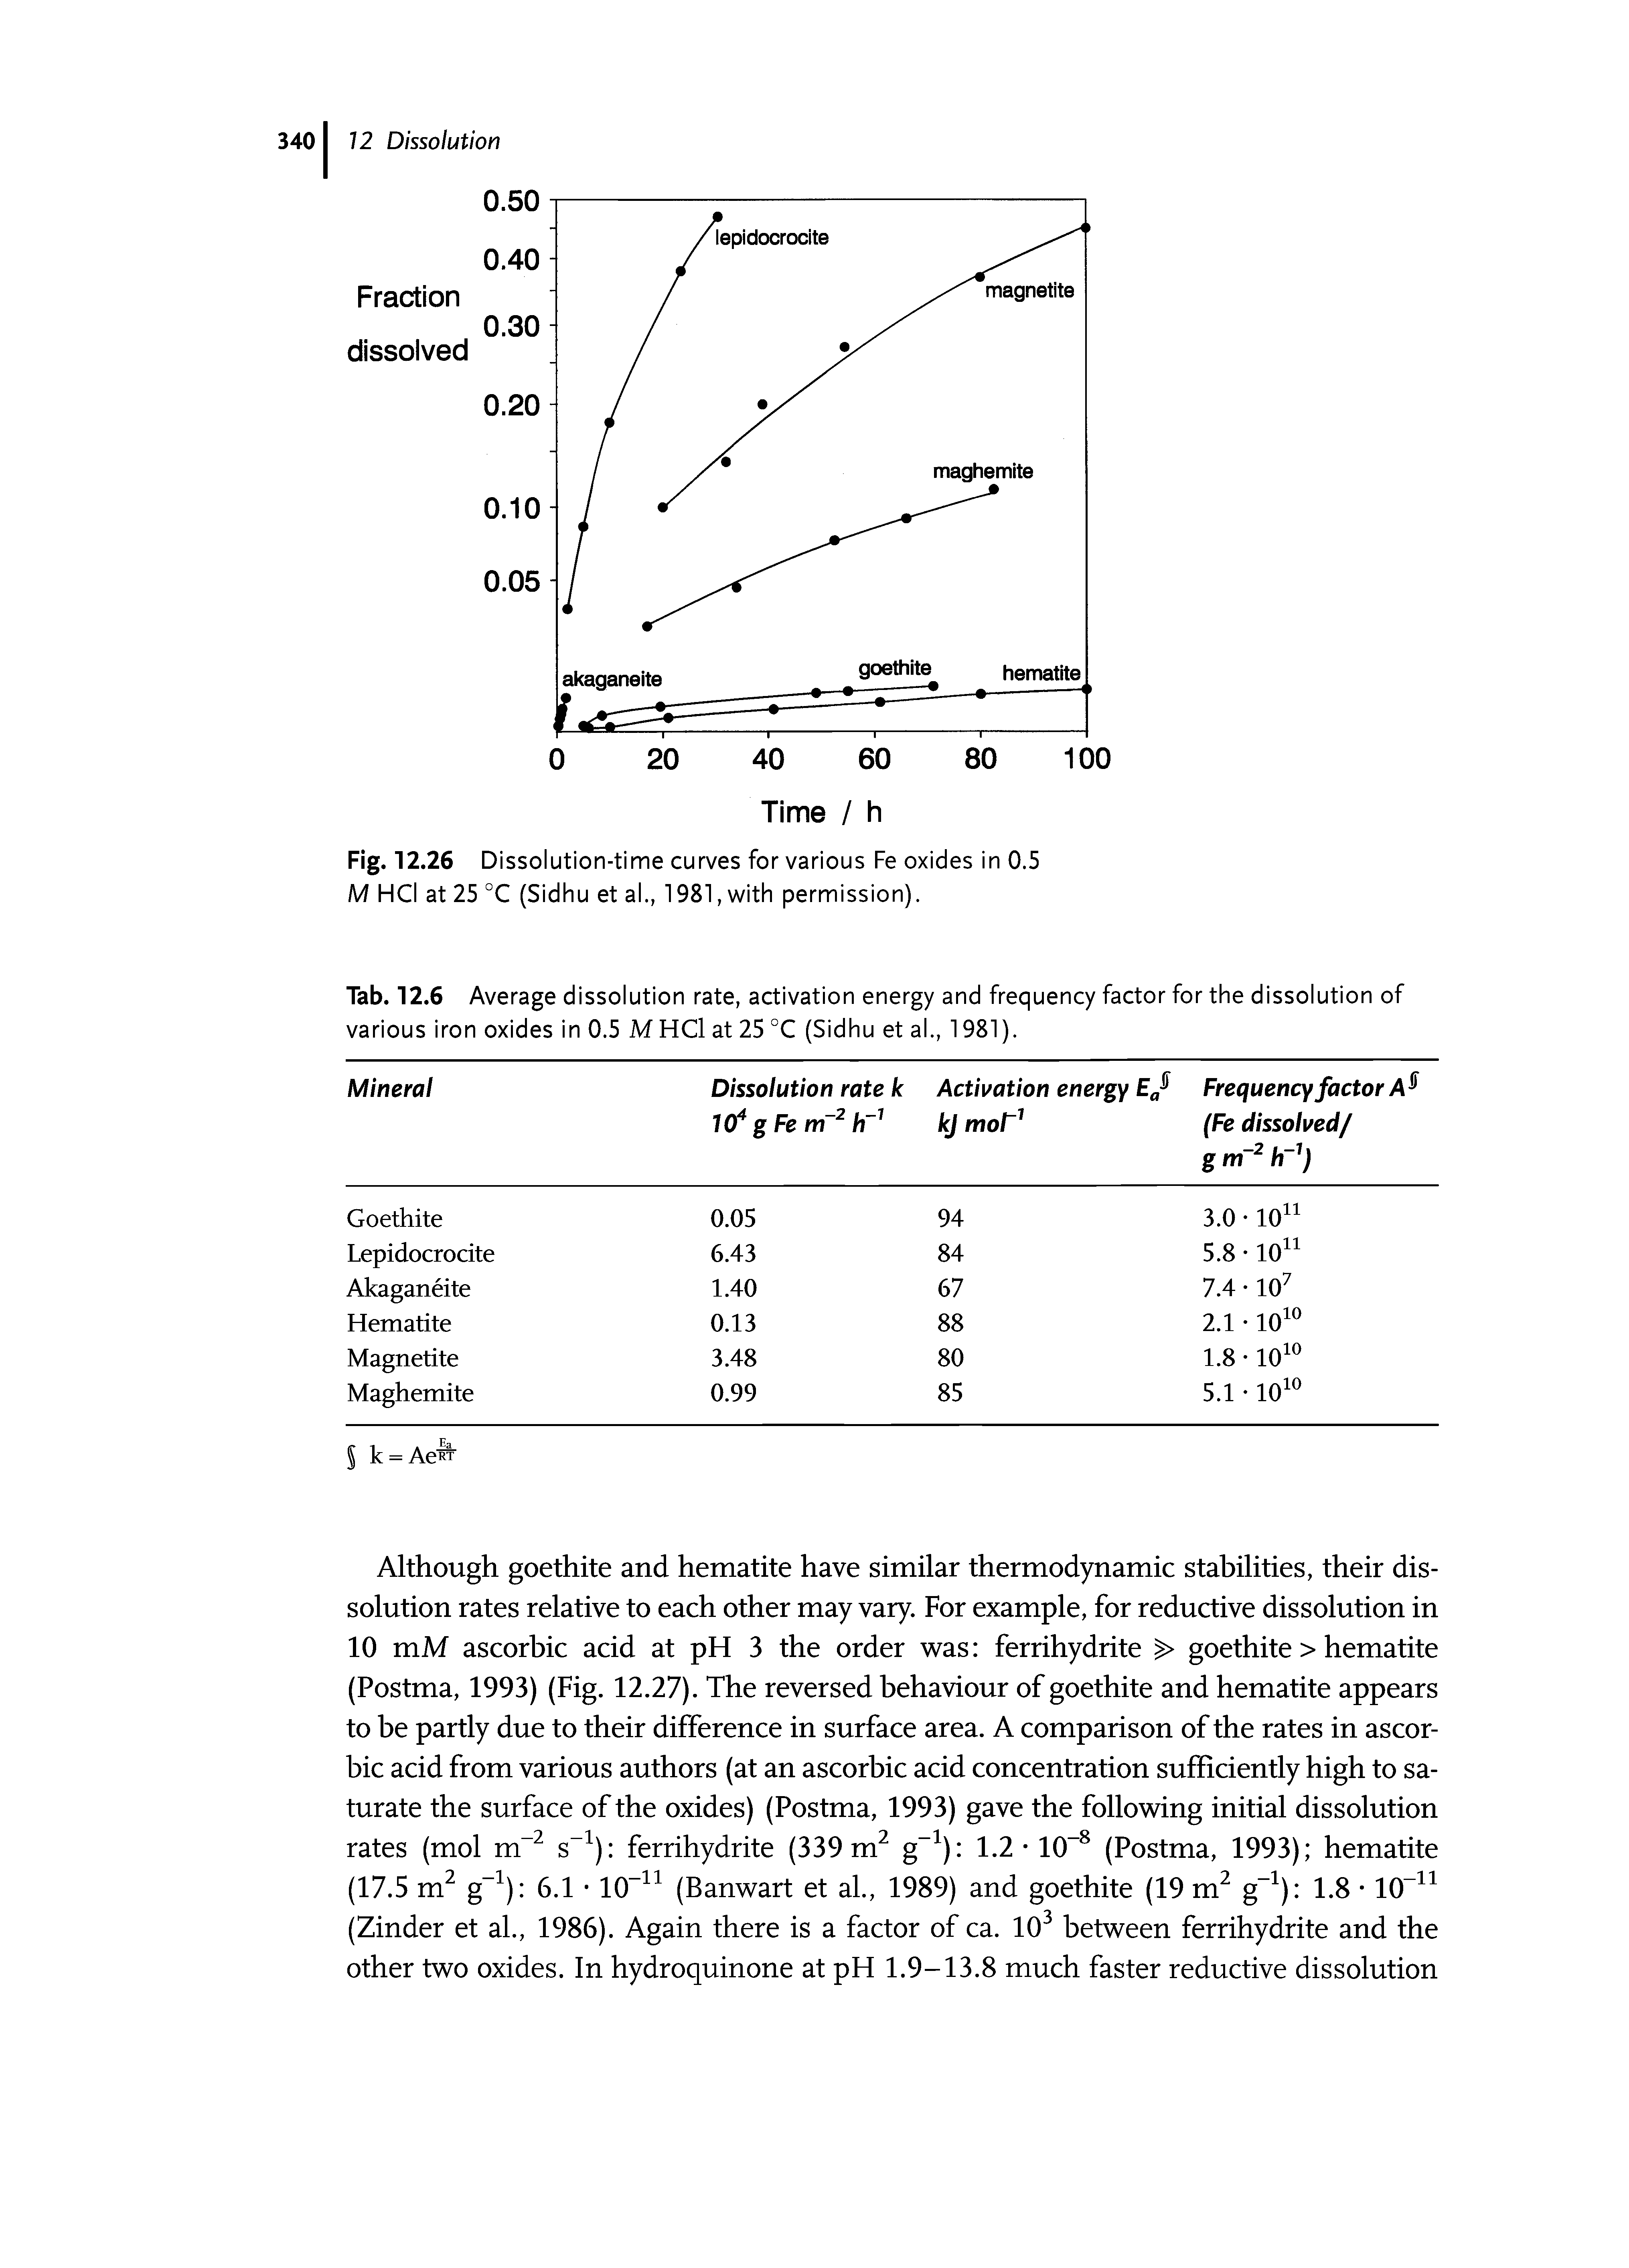 Tab. 12.6 Average dissolution rate, activation energy and frequency factor for the dissolution of various iron oxides in 0.5 M HCl at 25 °C (Sidhu et al., 1981).